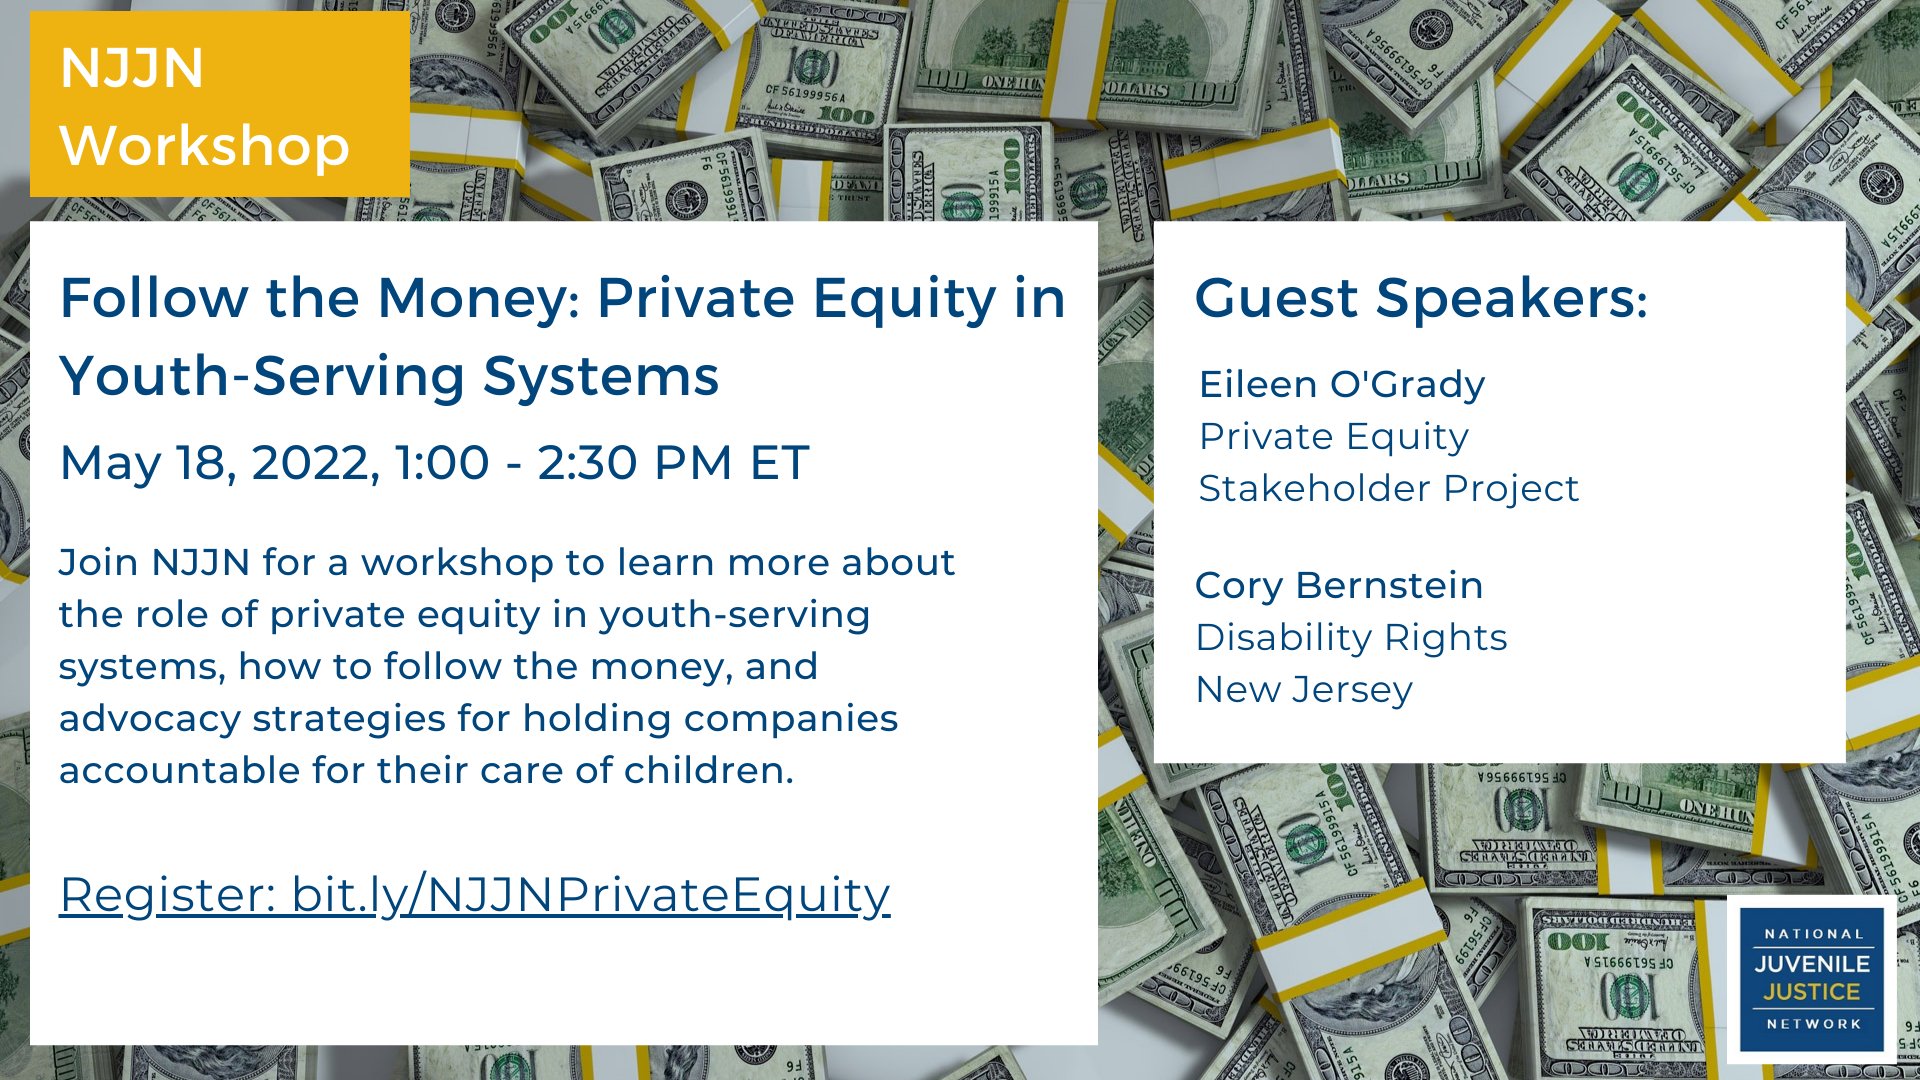 Follow the Money: Private Equity in Youth-Youth-Serving Systems webinar on May 18, 2022